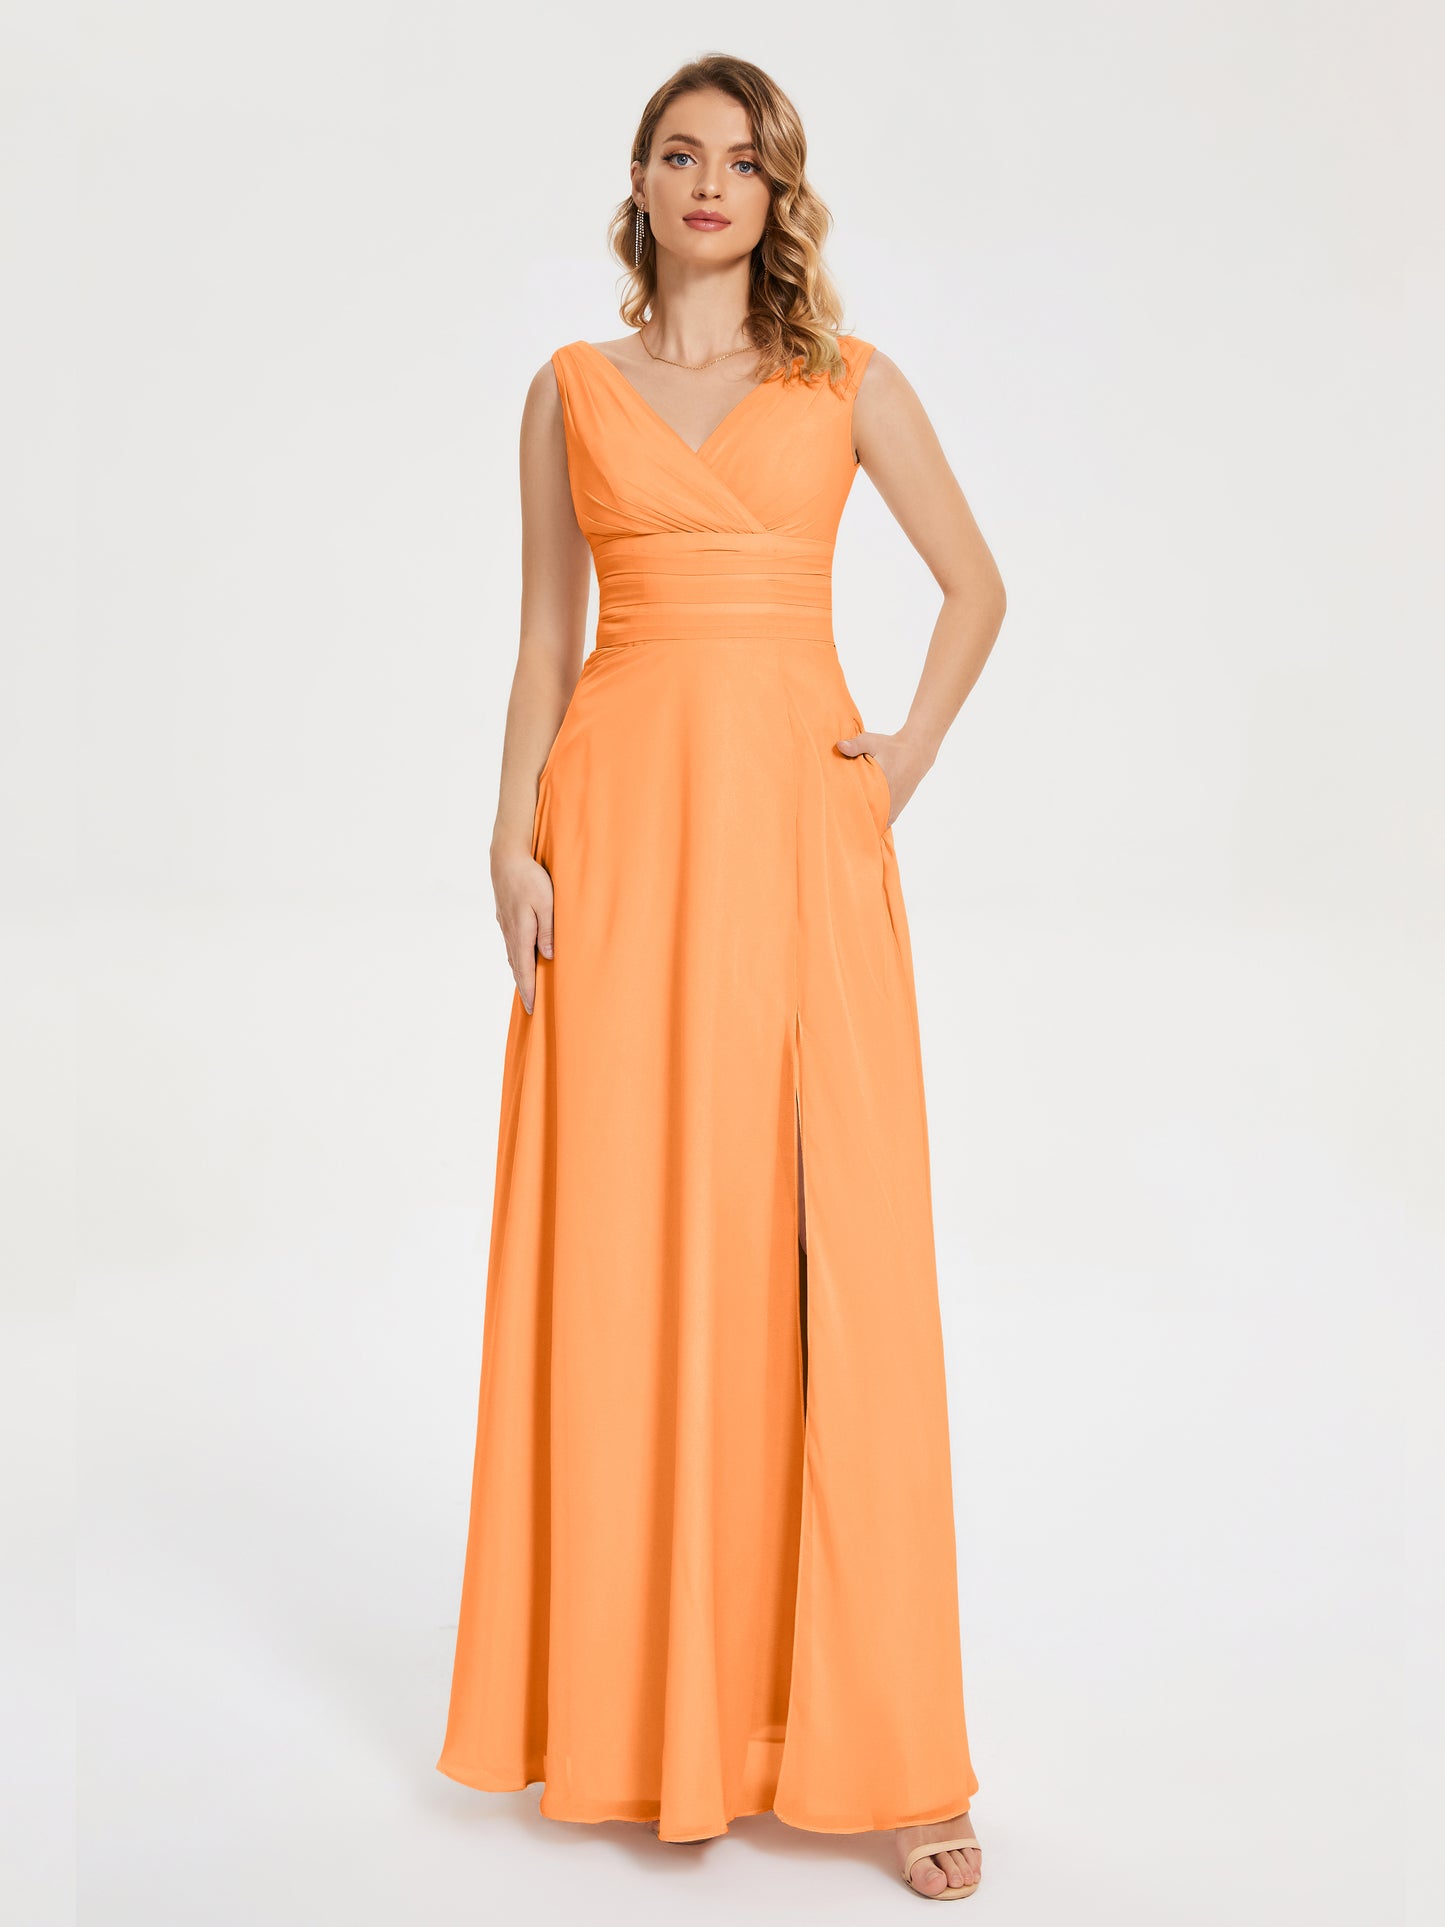 Lucille Elegant Chiffon Bridesmaid Dresses With Bow